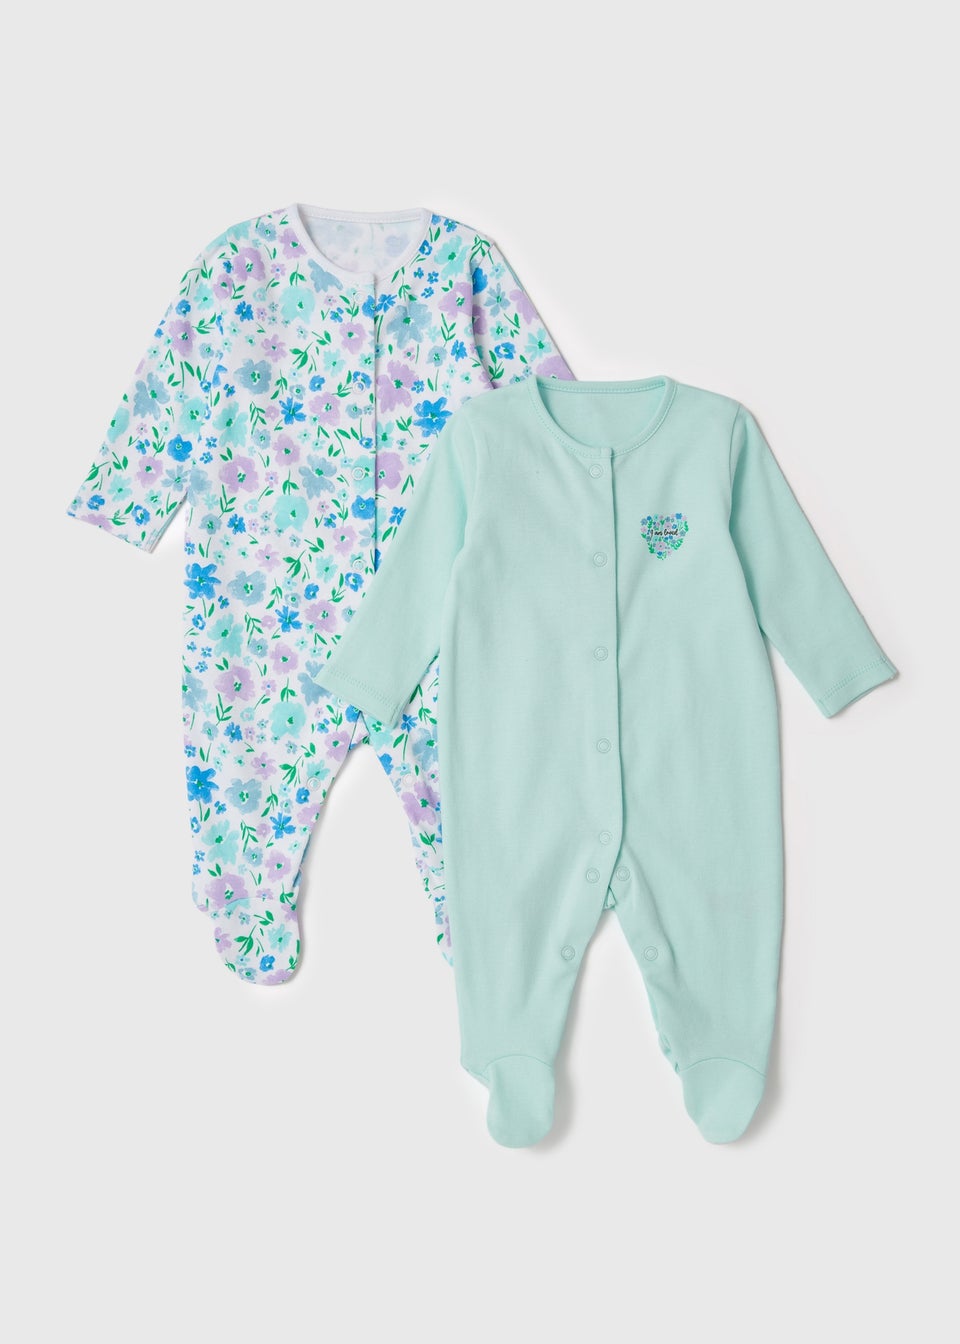 Baby 2 Pack Lilac Fresh Floral Sleepsuits (Newborn-23mths)